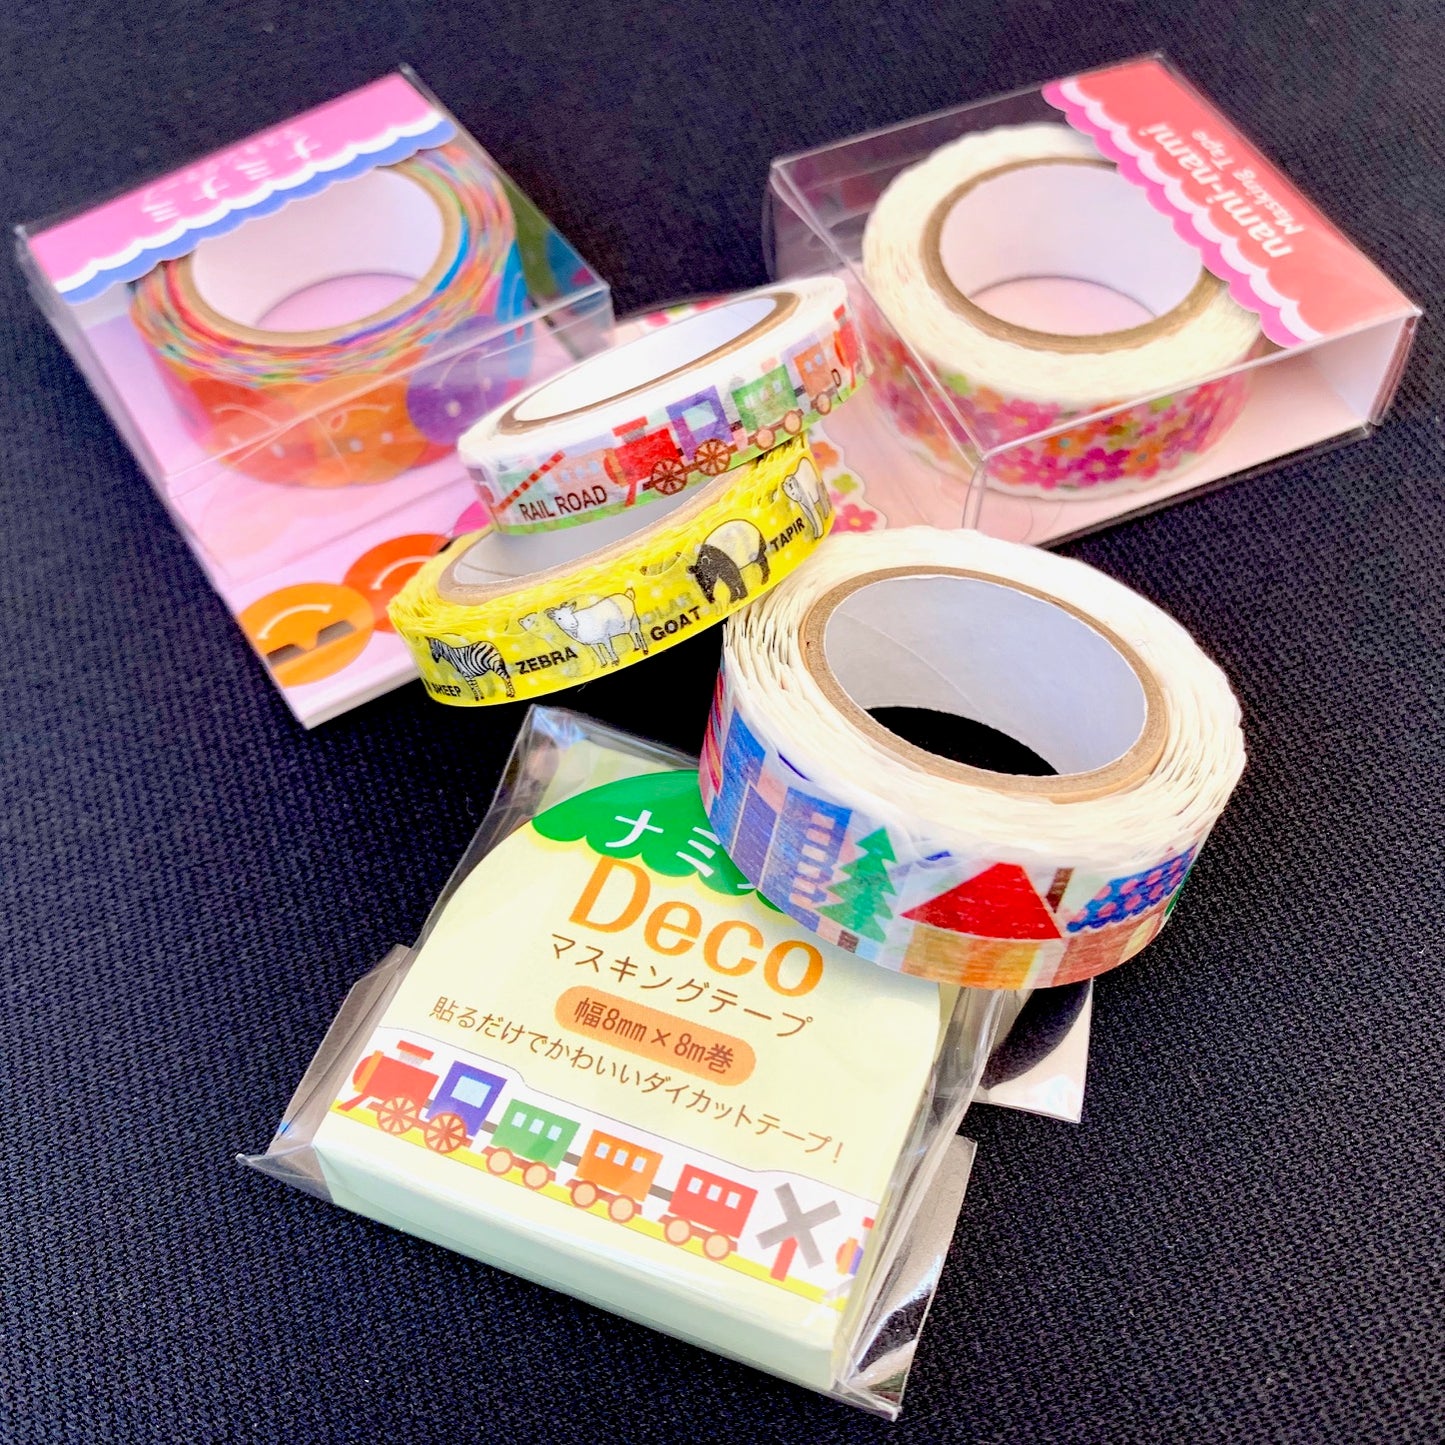 X 71071 JAPANESE WASHI TAPES - DISCONTINUED